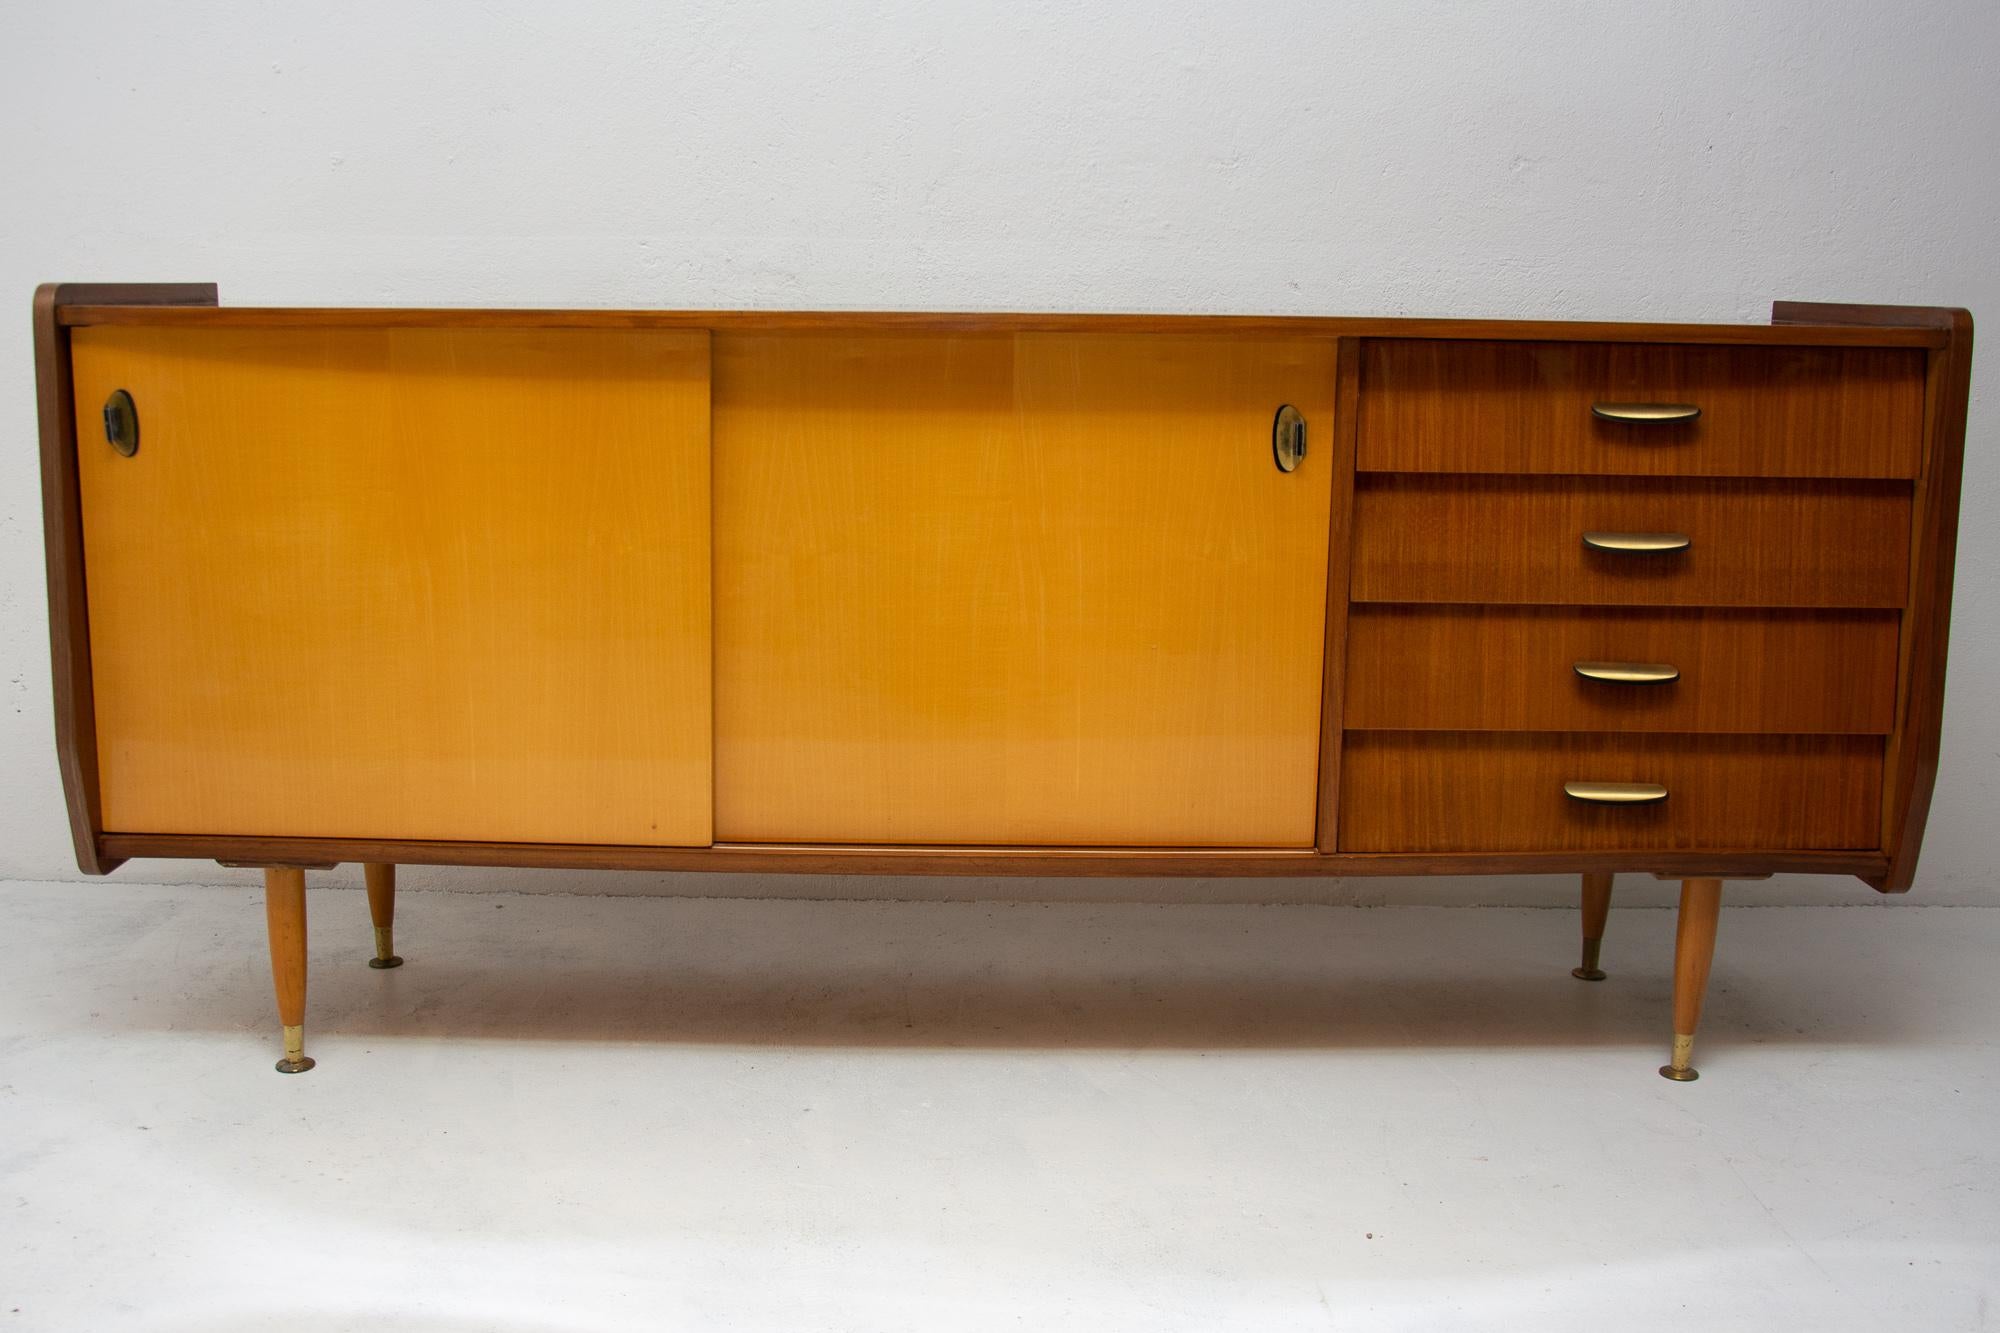 This sideboard was made in Italy in the 1960s. It features a wooden structure and mahogany wood, sideboard stands on beechwood legs. Very simple and attractive design typical of Italian design school. The sideboard is in very good vintage condition